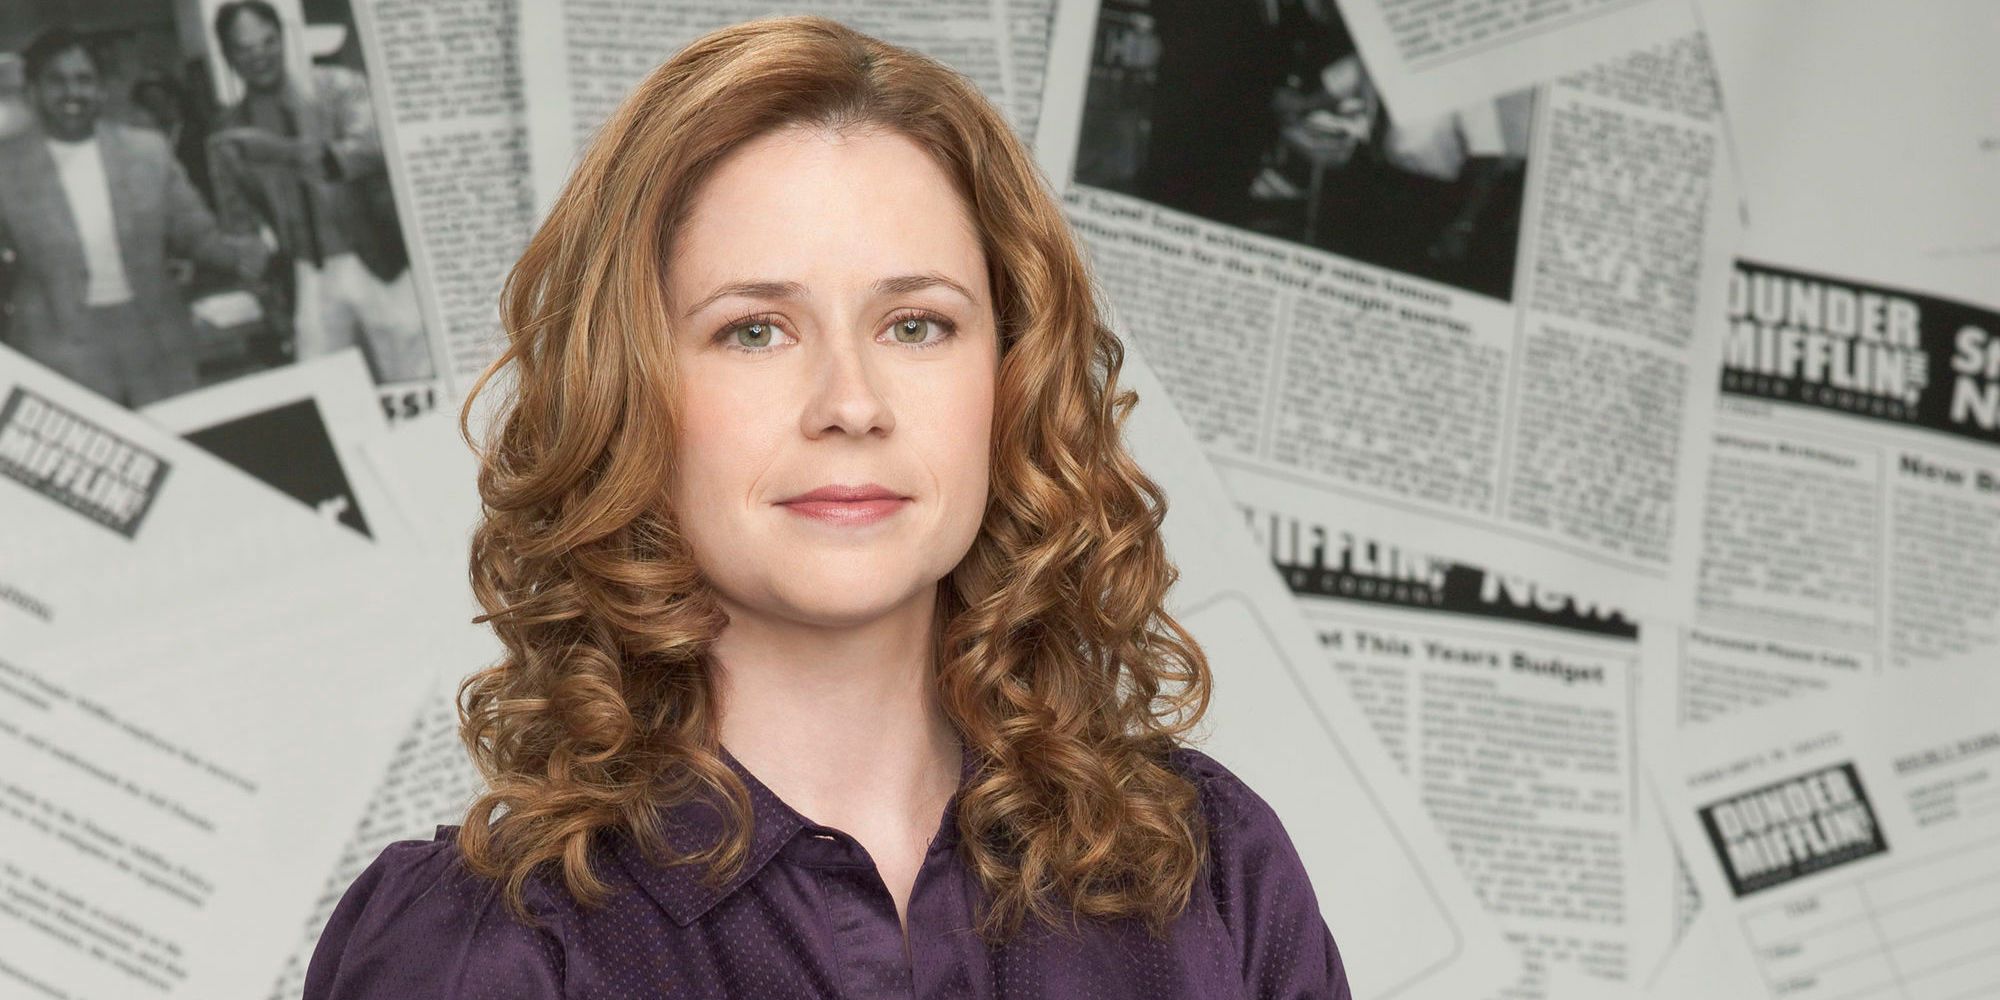 Humans Of Cinema - Dear Pam Beesly, Dunder Mifflin, this is Pam. You  have evolved and grown immensely from a receptionist, to a salesperson, to  cherishing mother, and we have seen it